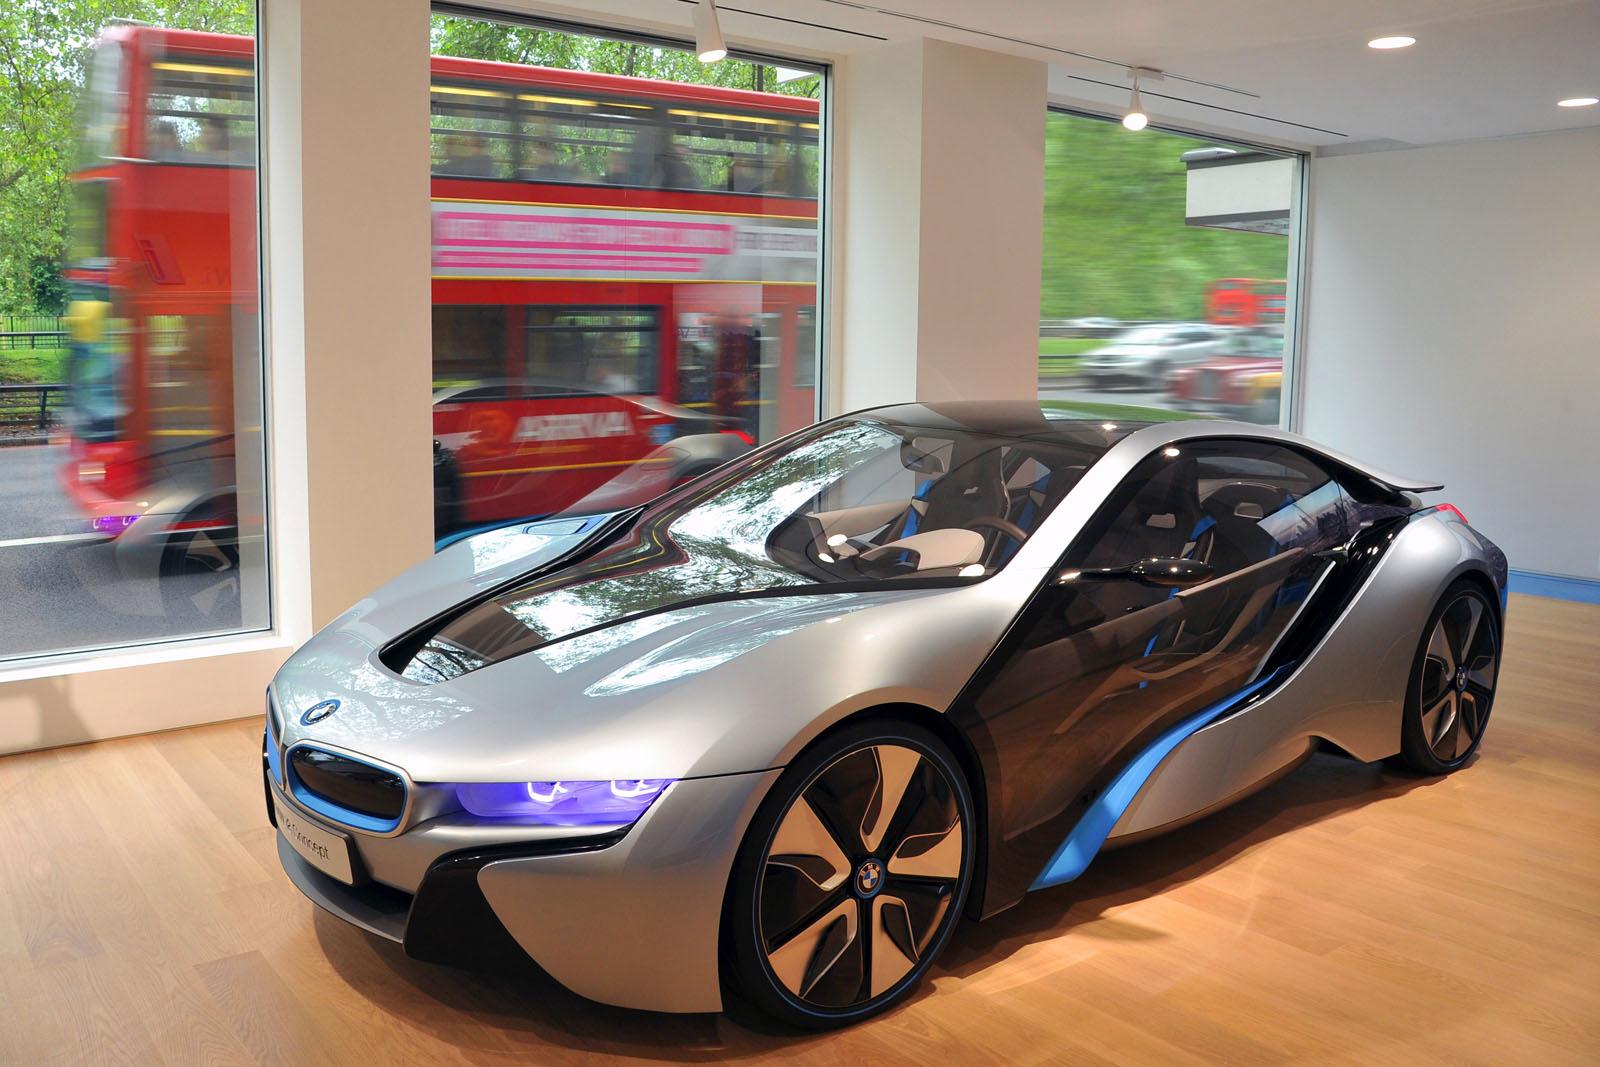 BMW i Store opened in London